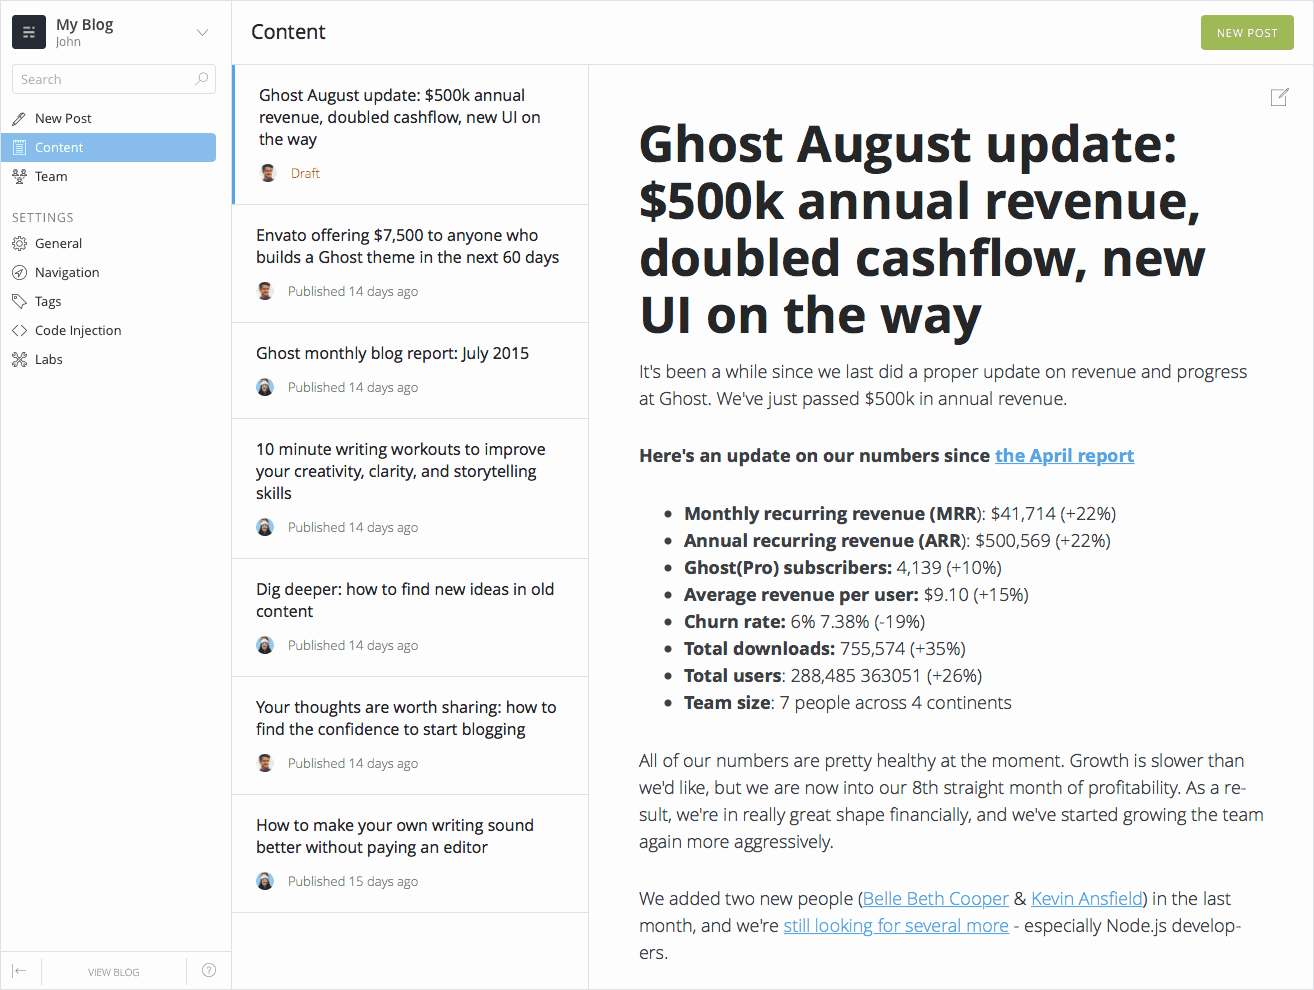 Ghost 0.7.0